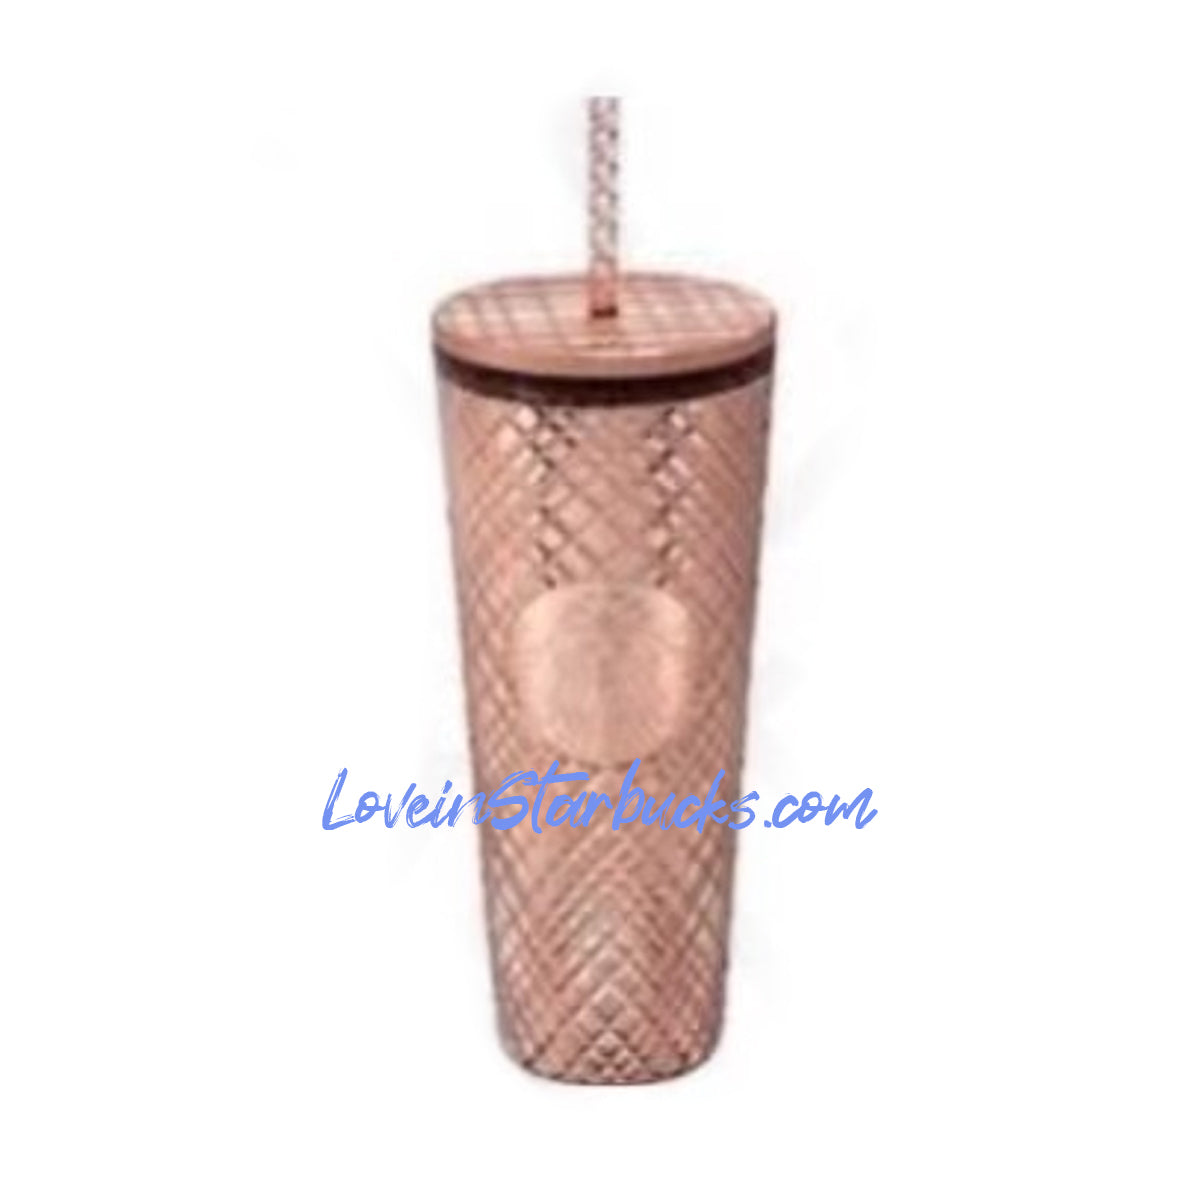 Starbucks Studded Rose Gold Jeweled Coffee Tumbler Cold Cup Venti